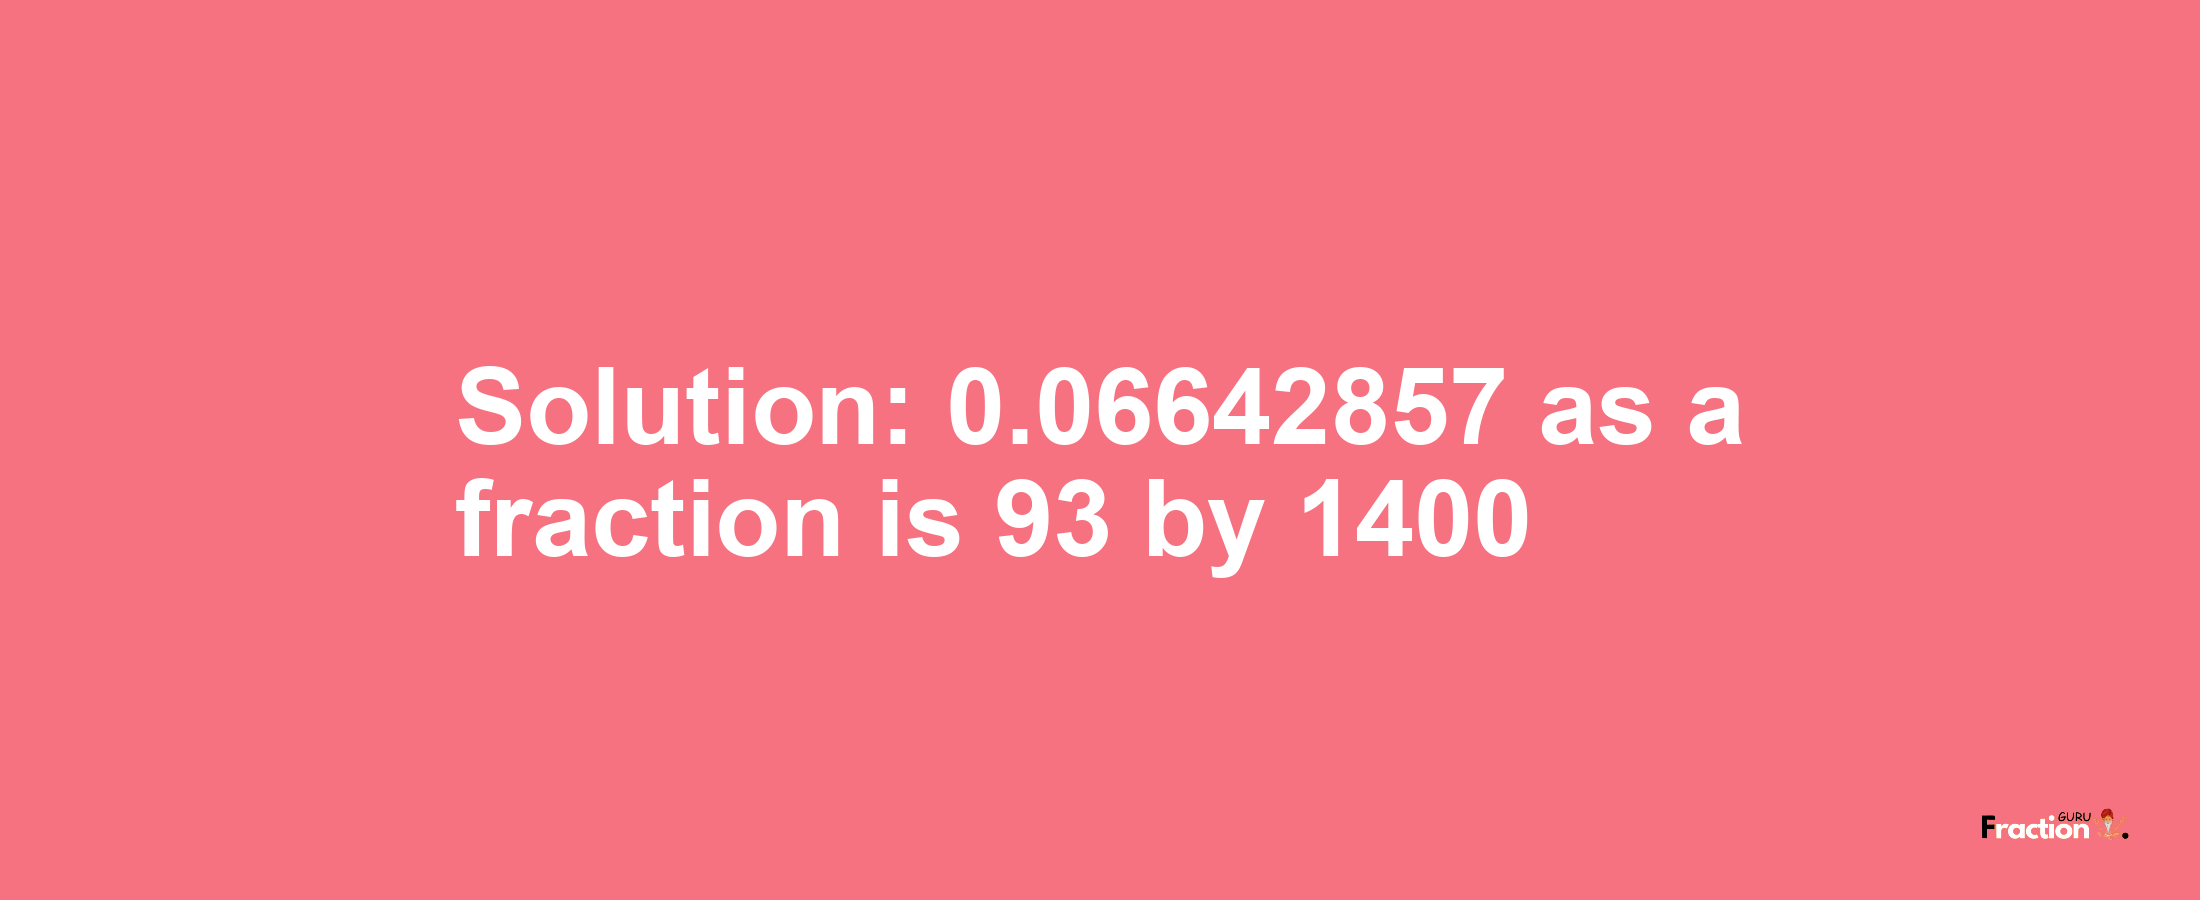 Solution:0.06642857 as a fraction is 93/1400